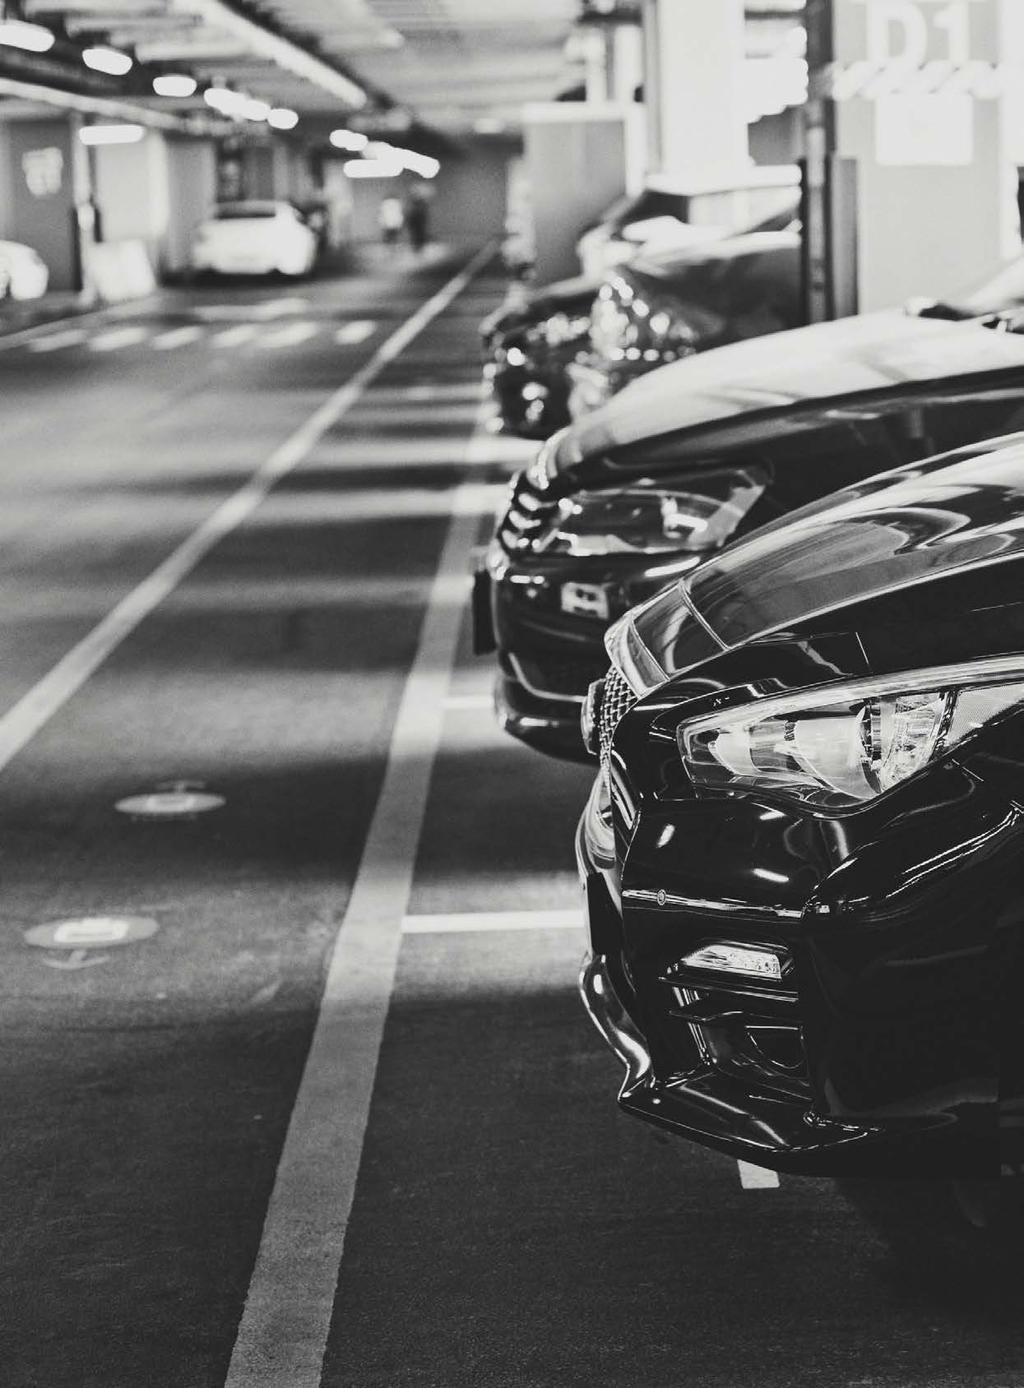 CHALLENGES TO EFFECTIVE PARKING LOT MANAGEMENT Whether it s a small parking lot or a busy, multi-level garage, parking headaches turn visitors or customers away.